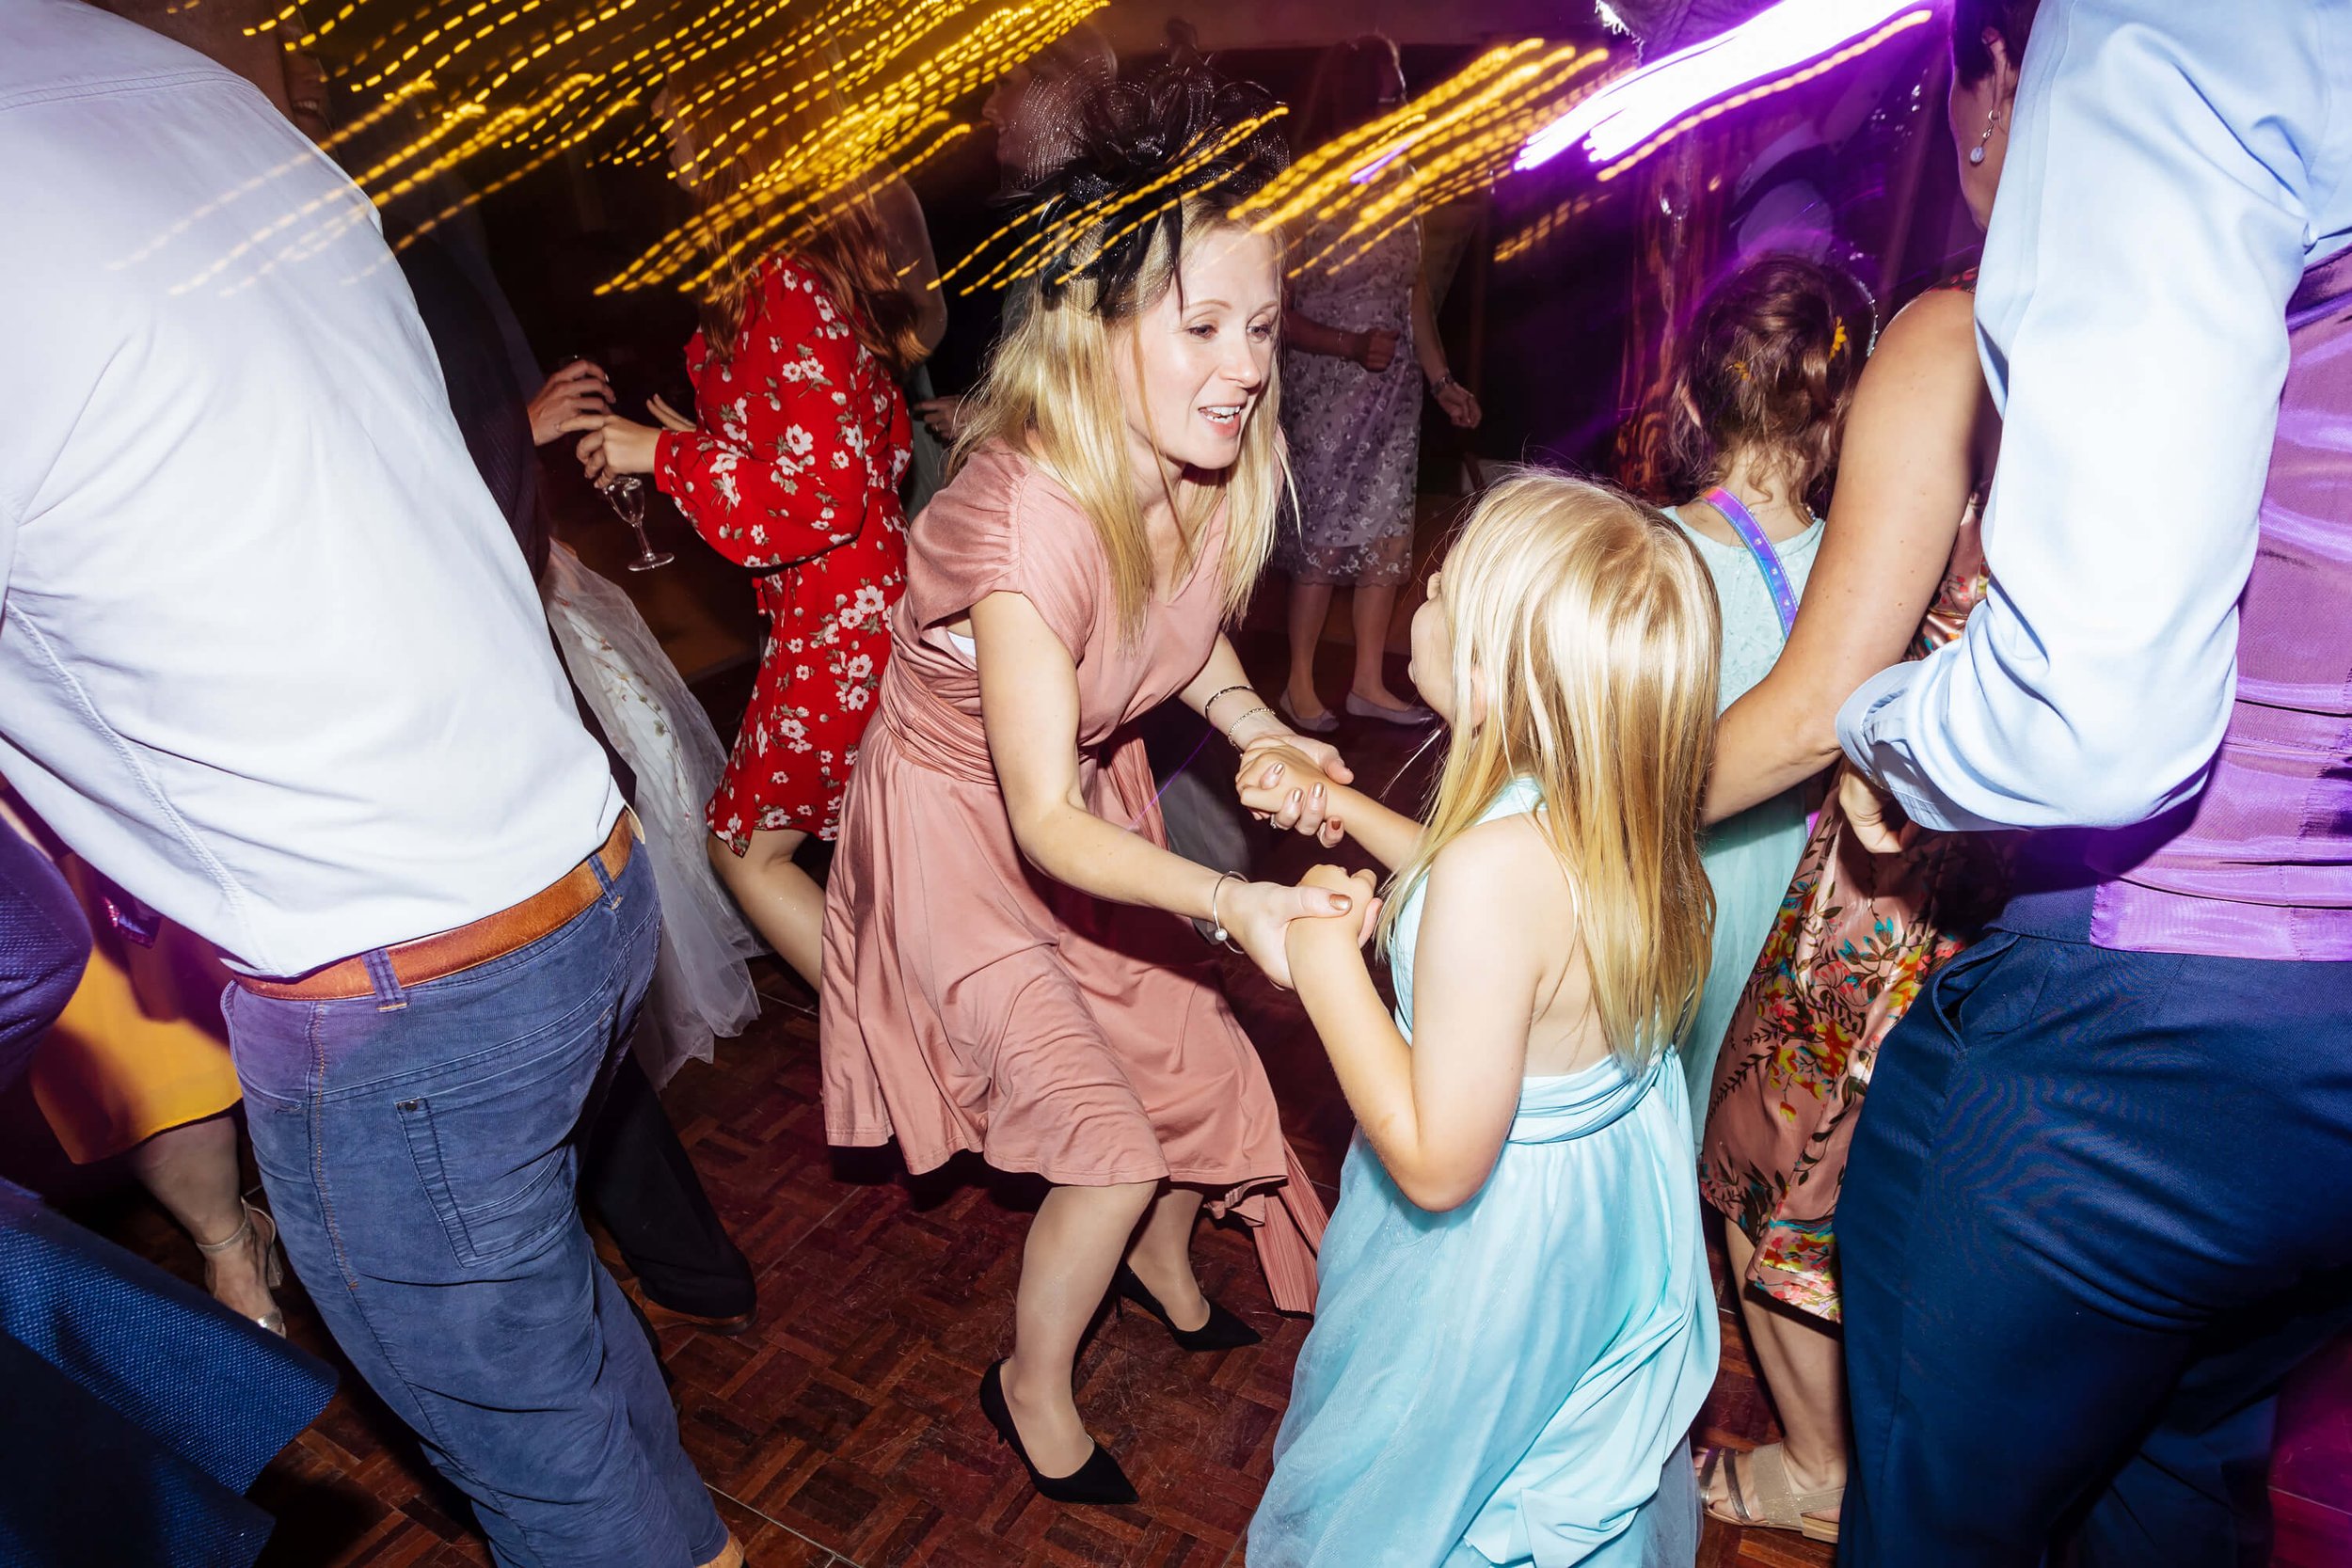 Mum and daughter on the dance floor at a wedding